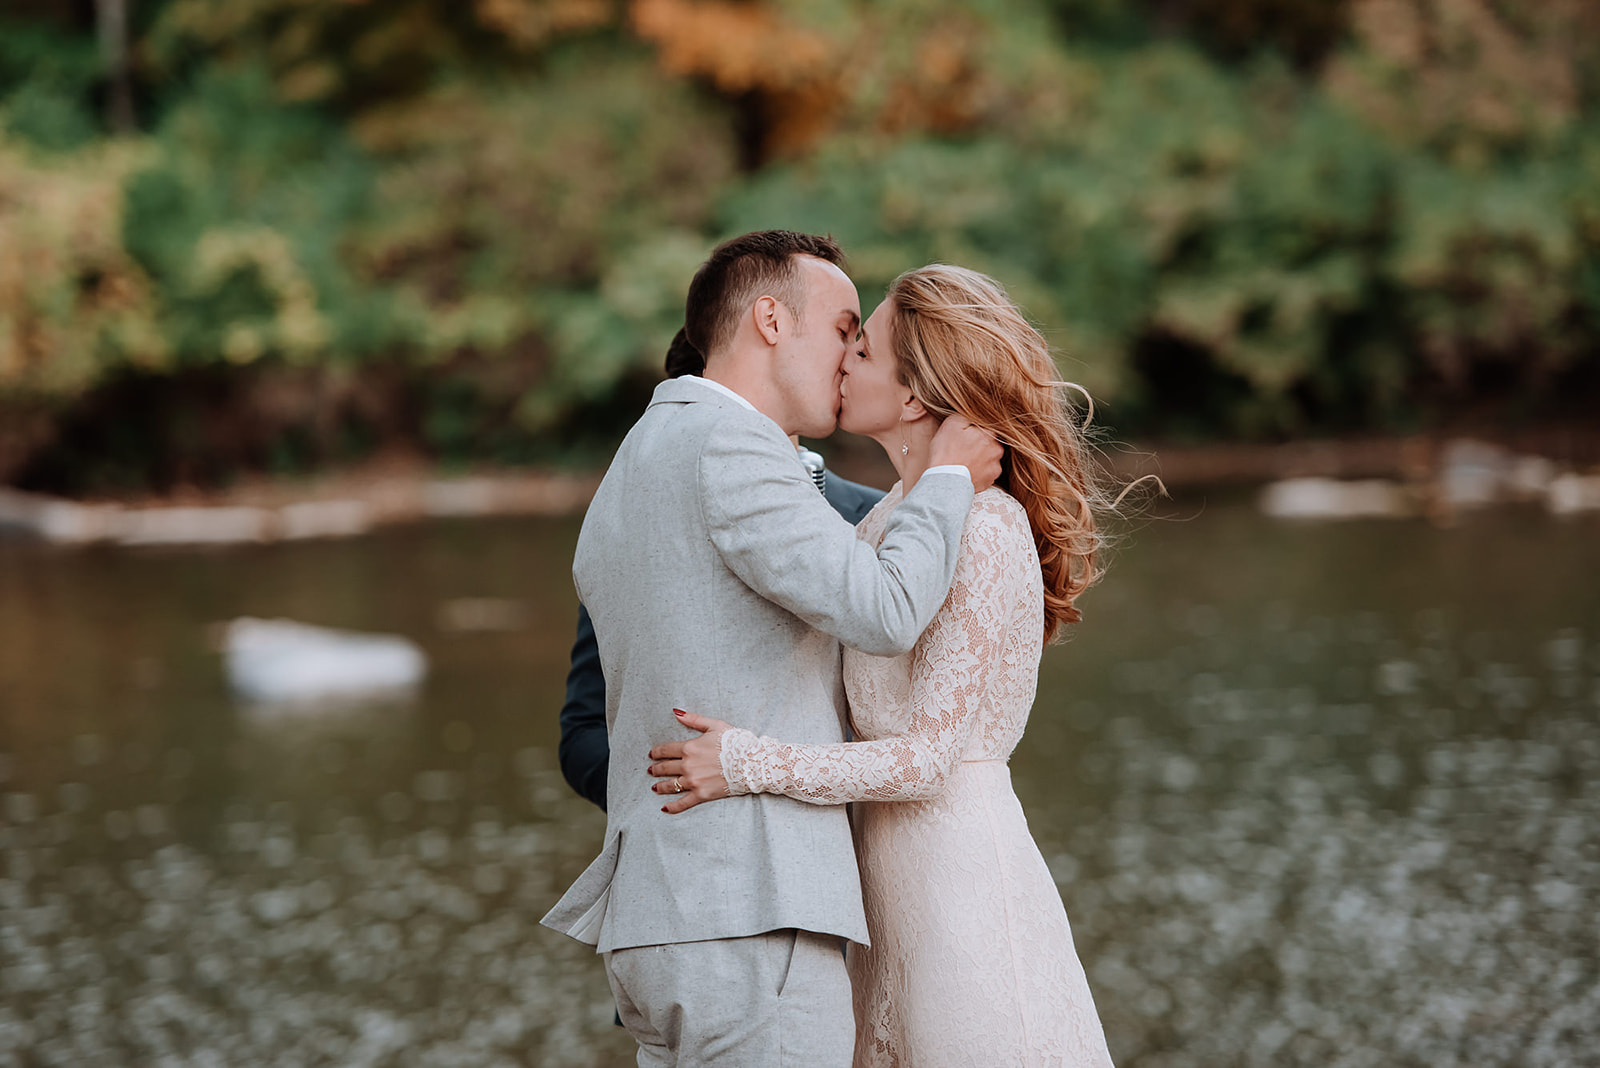 Couple embraces to share their first kiss after saying I Do.